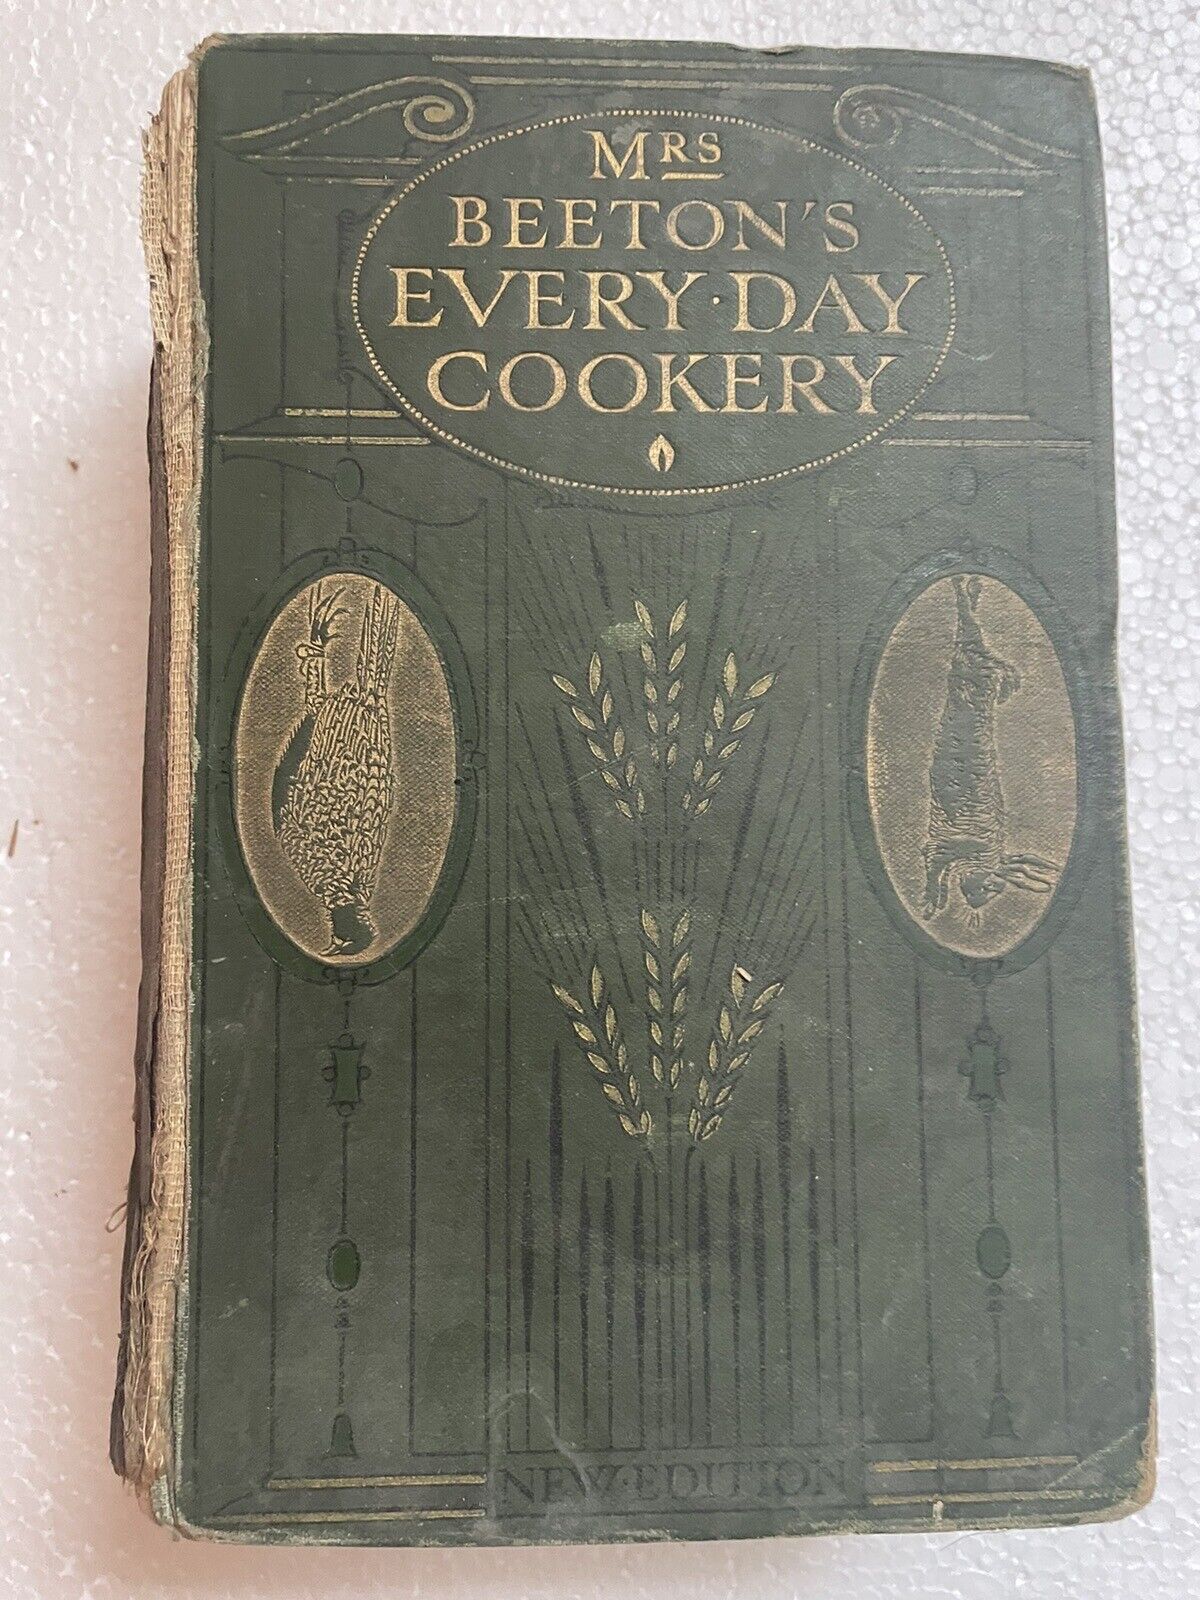 Antique 1912 Mrs. Isabella Mary Beeton’s EVERY DAY COOKERY THANKSGIVING SALE